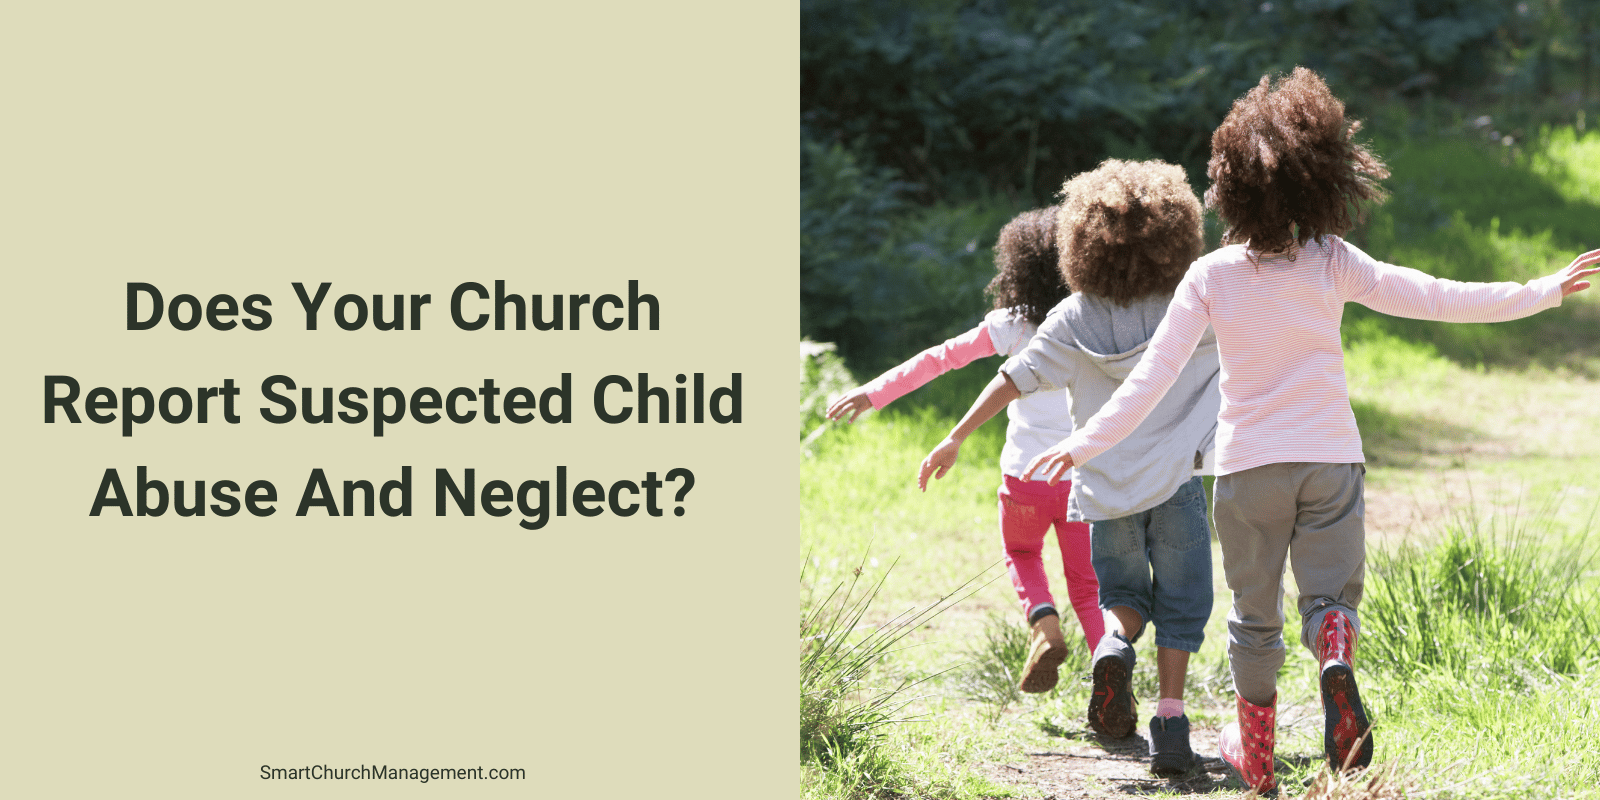 should a church report suspected child abuse and neglect